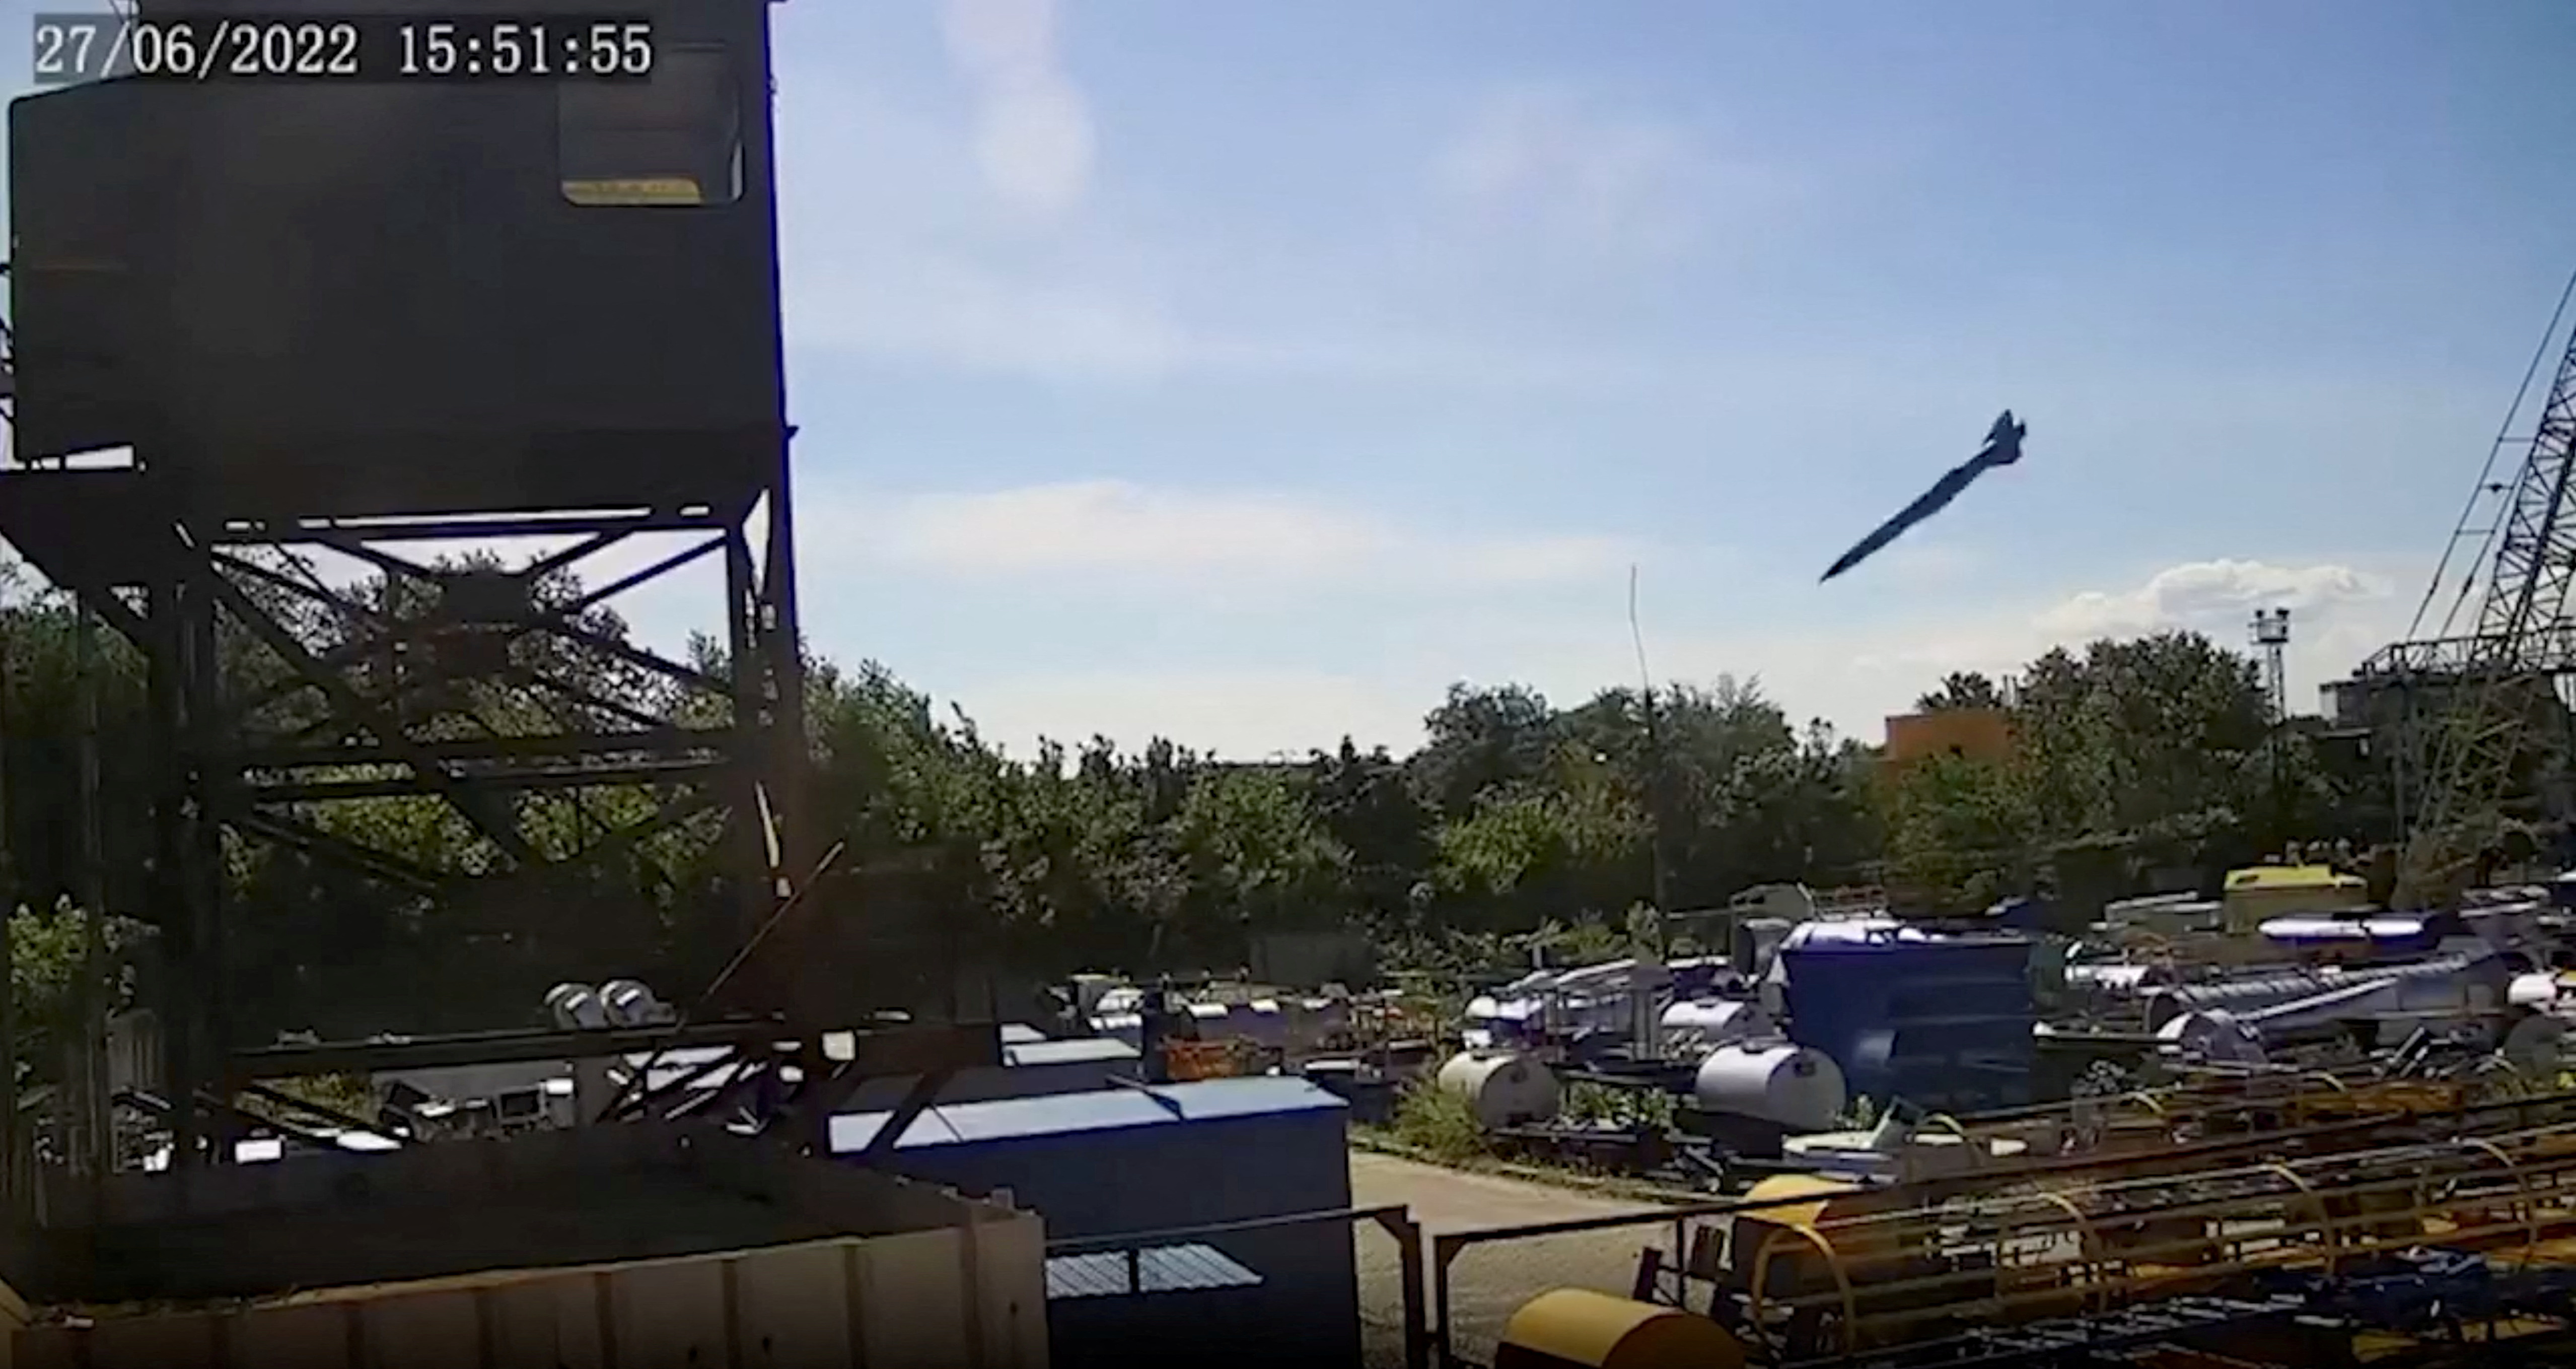 A Russian missile approaches a shopping mall at a location given as Kremenchuk, Ukraine in this still image taken from handout CCTV footage released on June 28.